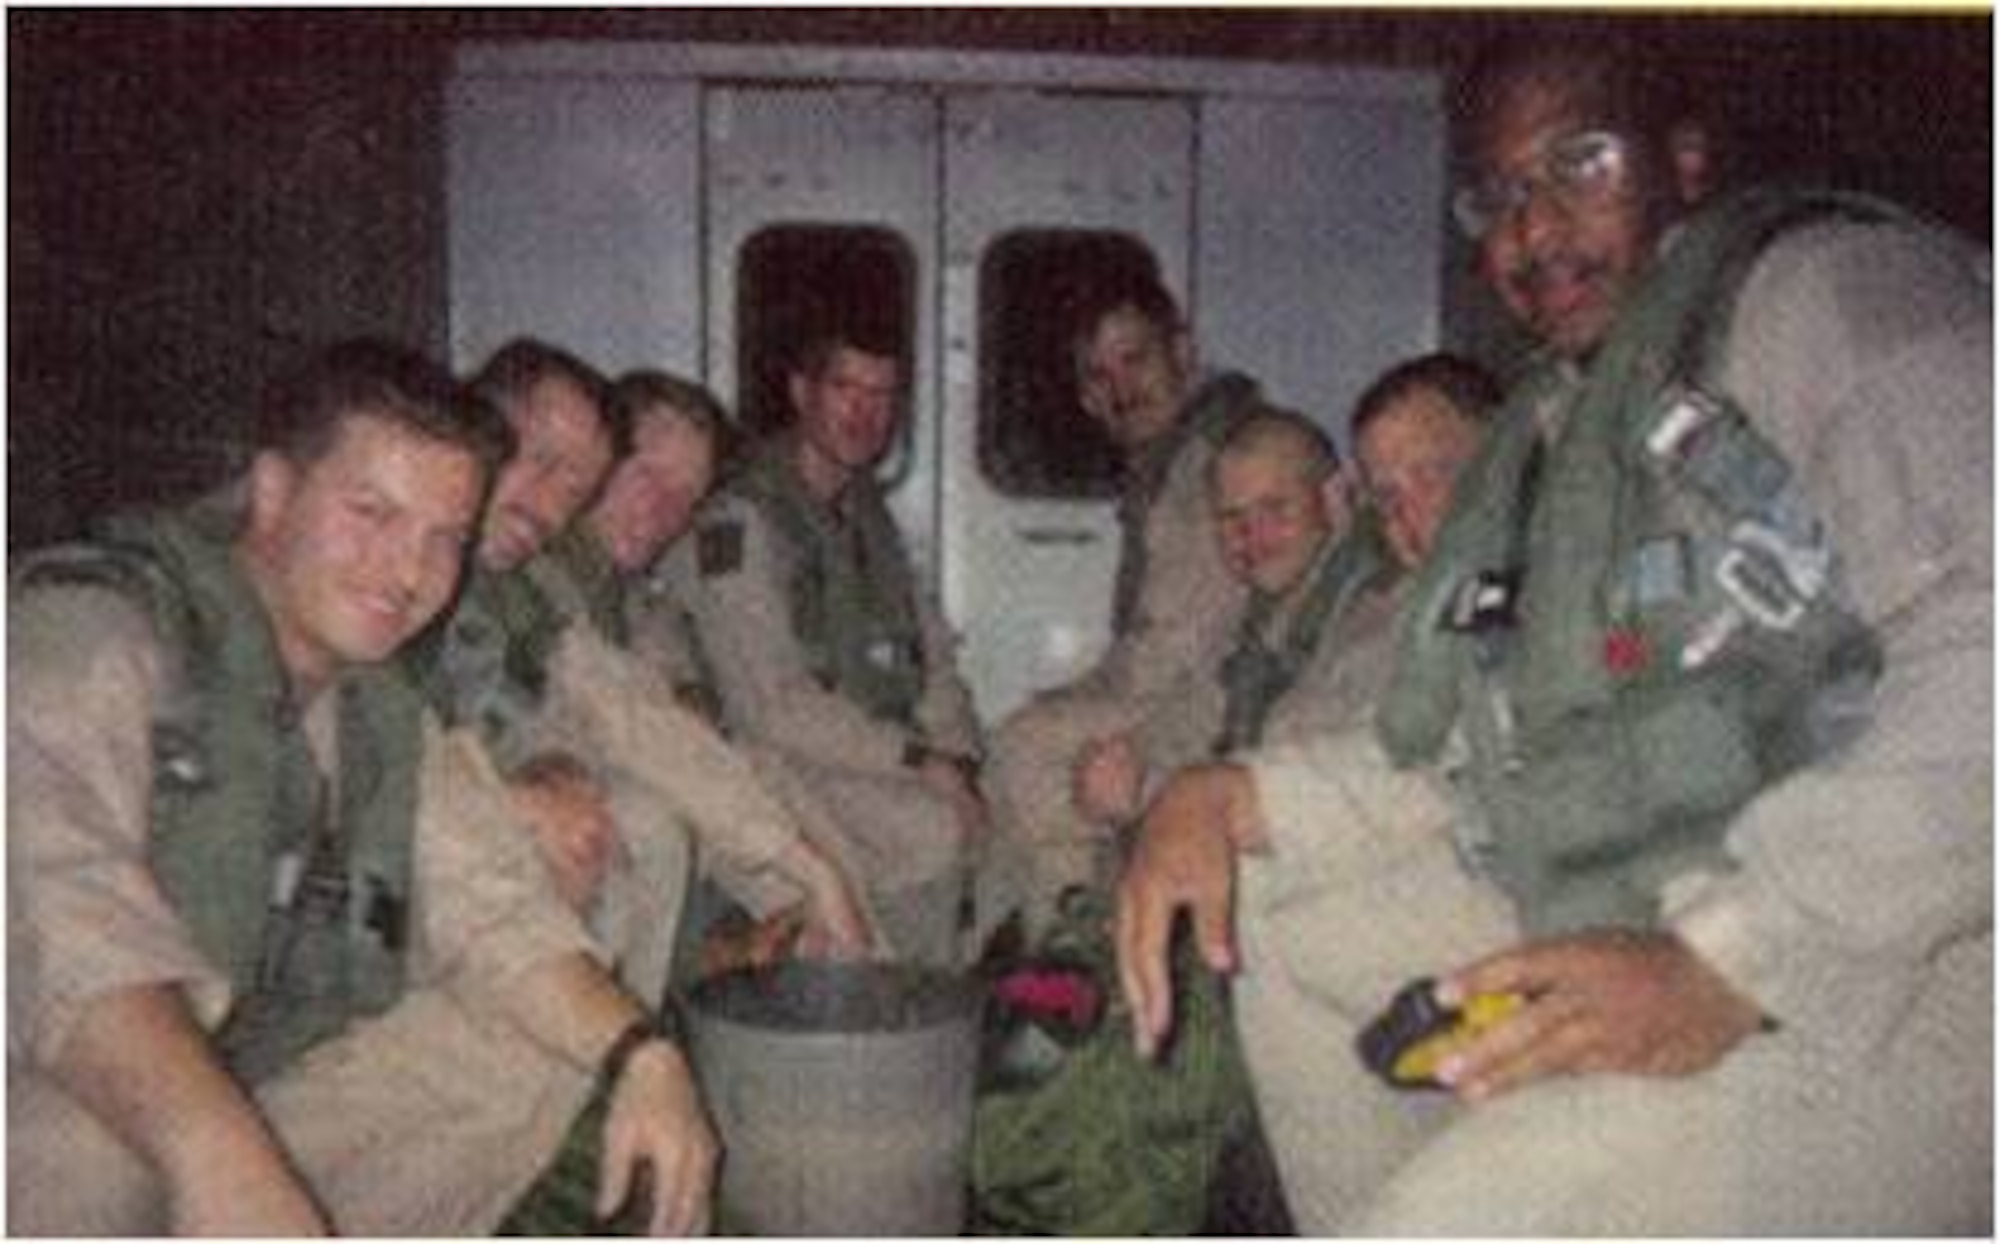 History-making aircrews from the 37th Bomb Squadron ride in the back of a "bread truck" on their way to the B-1 bomber they'll use on the second night of Operation Desert Fox, December 1998. One B-1 from each deployed bomber squadron – the 37th BS and the 9th BS, Dyess Air Force Base, Texas – flew on the second and third nights of ODF. (U.S. Air Force courtesy photo/Released)